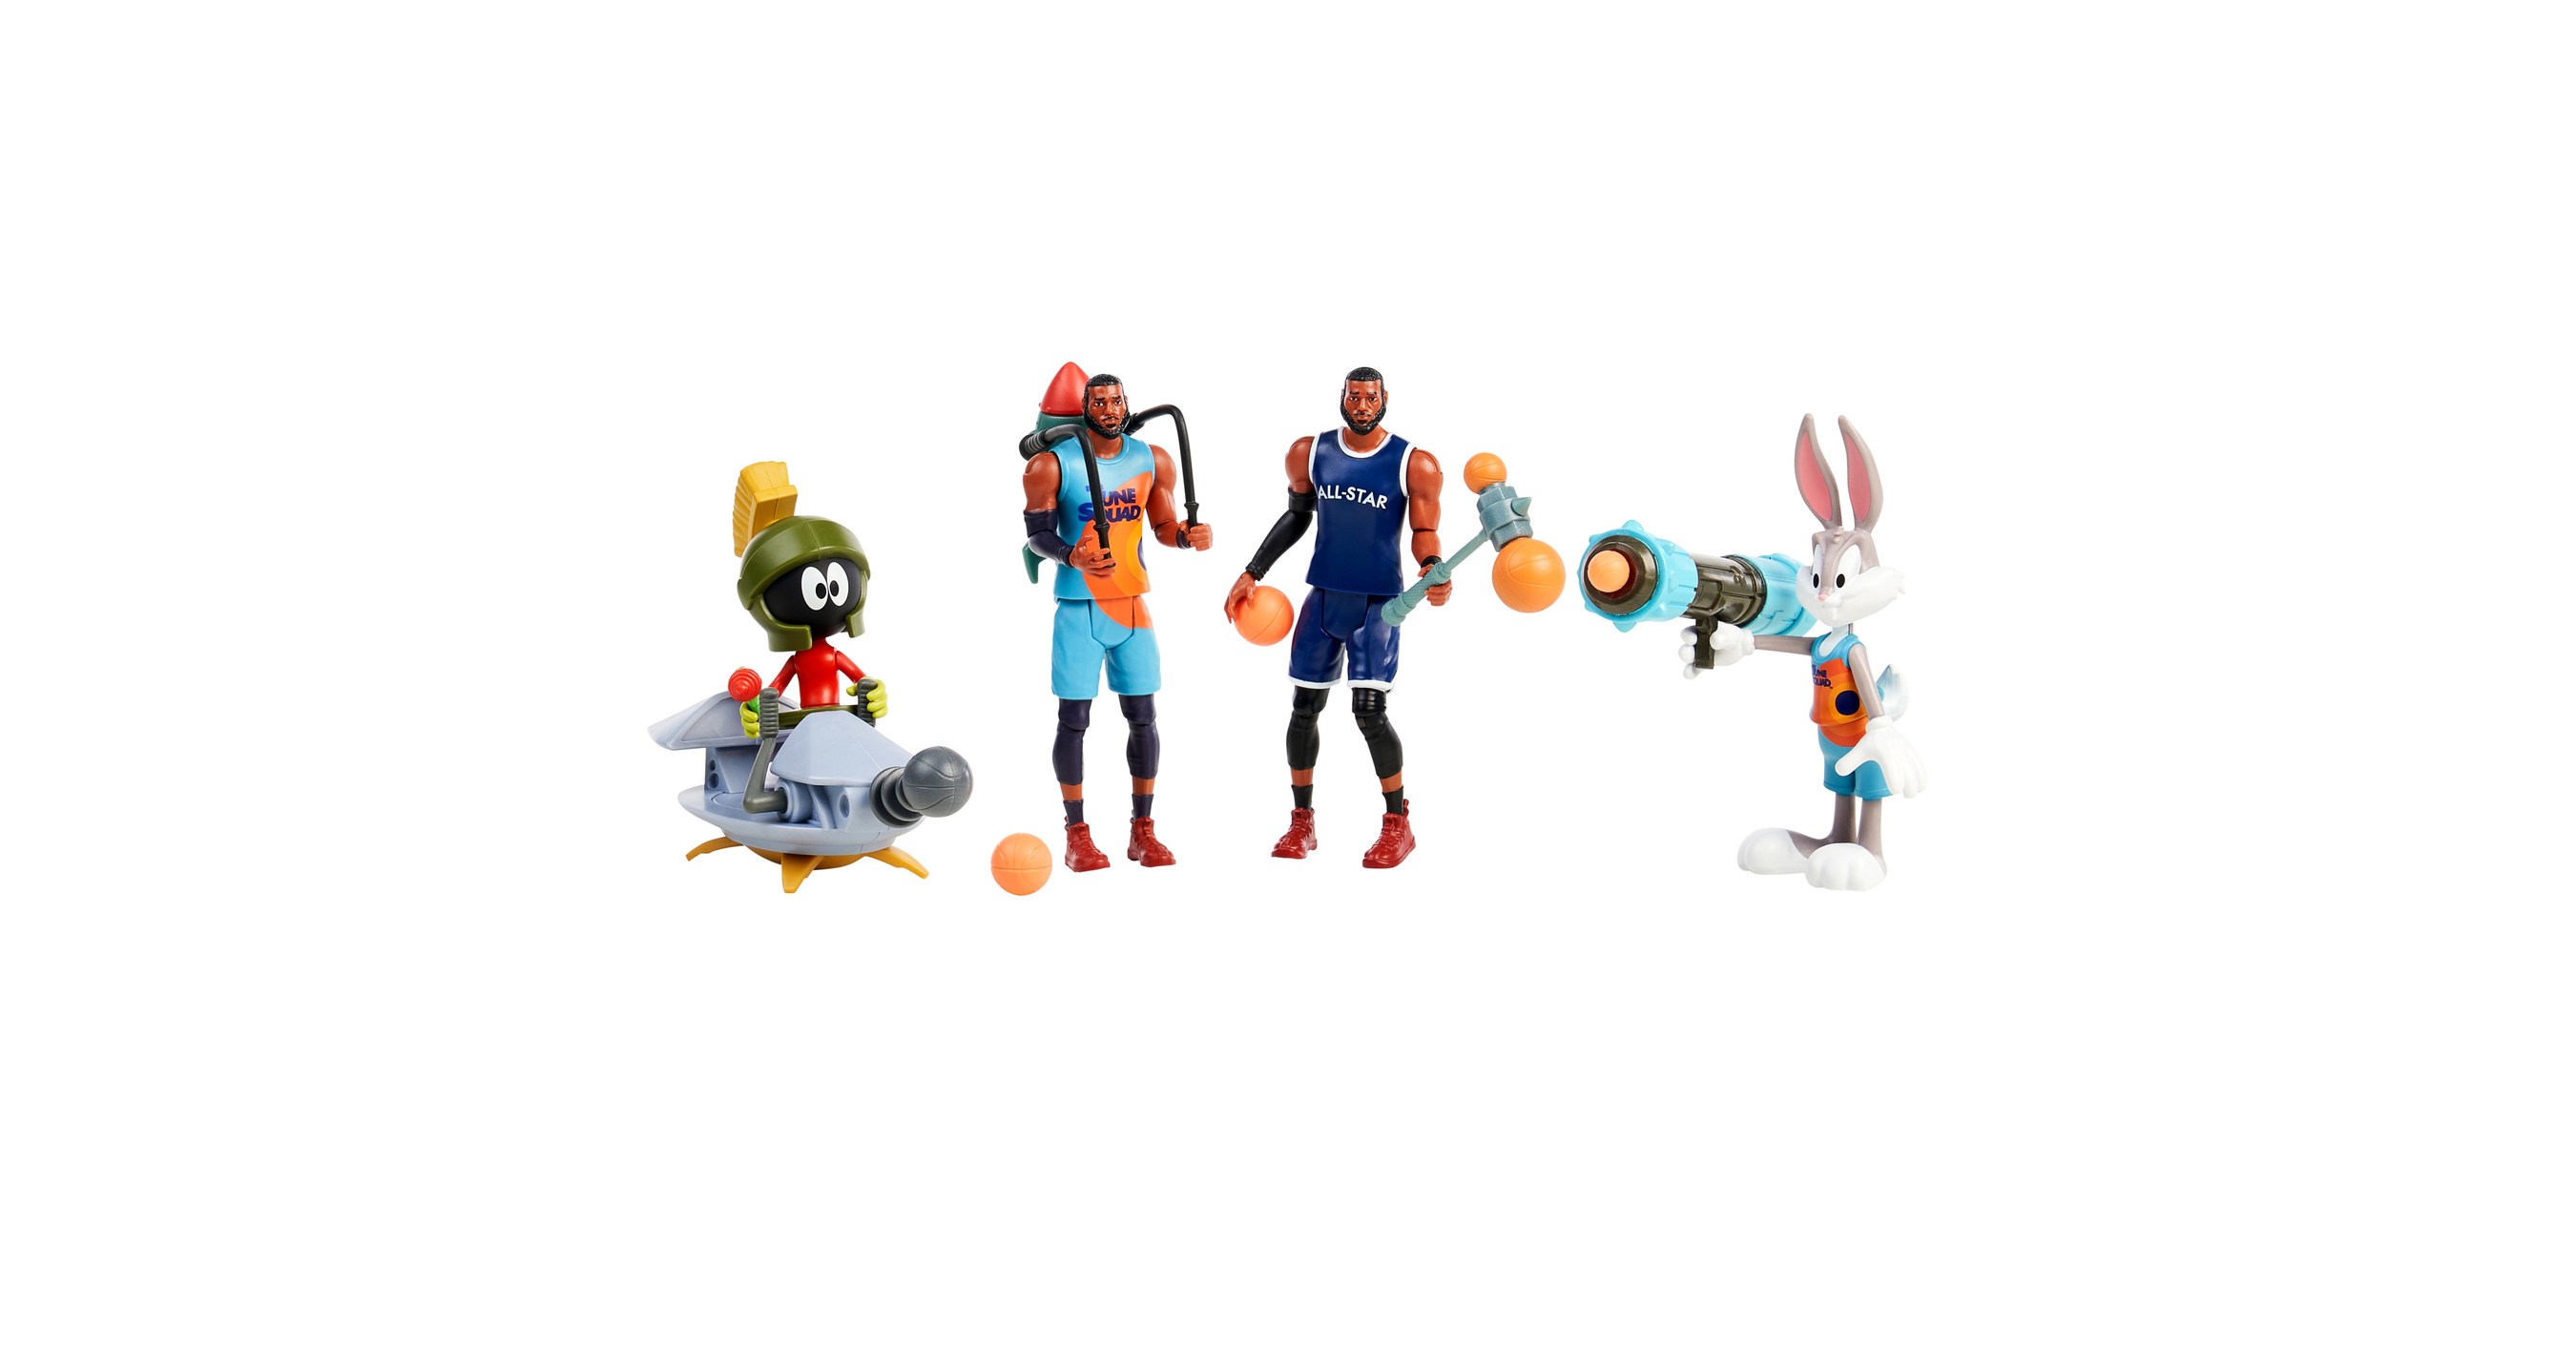 Space Jam: A New Legacy - Social Toolkit